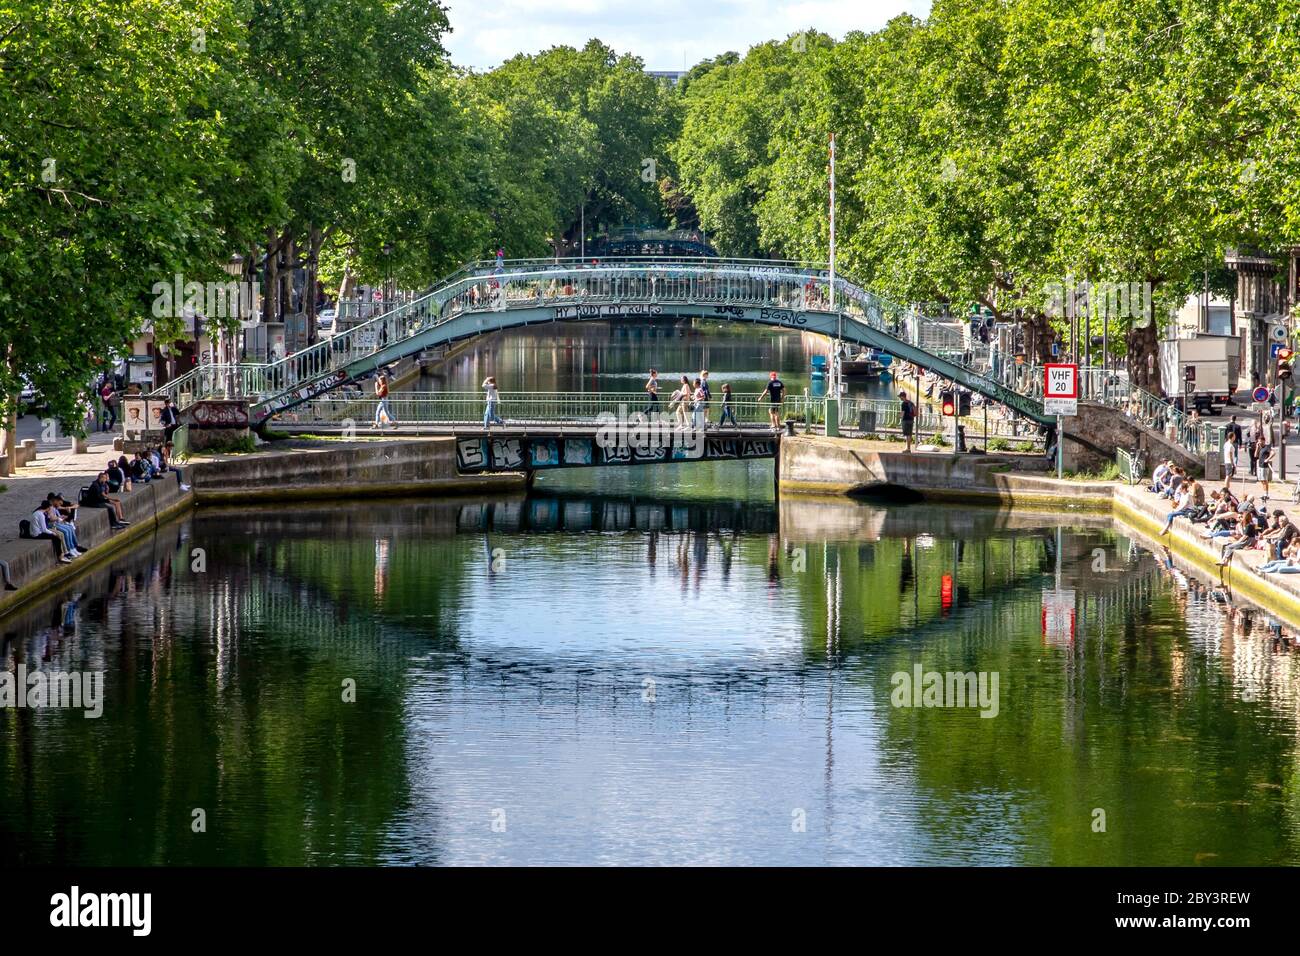 Paris, France - May 25, 2020: Street view of Saint Martin's canal, located in the french light-city, capital of France, Paris Stock Photo